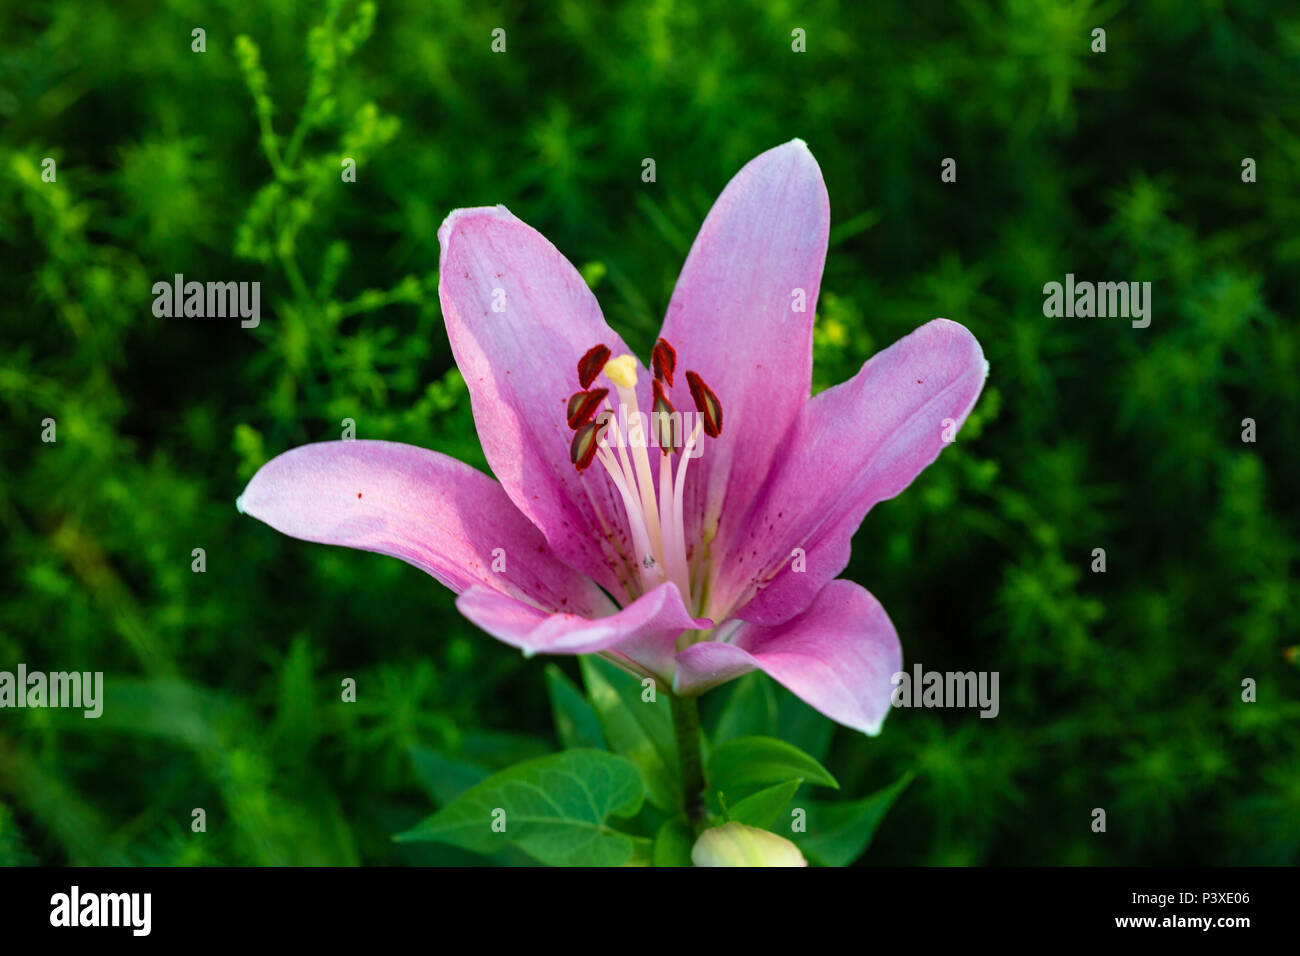 a side view of a pink lily newly opened in the garden Stock Photo